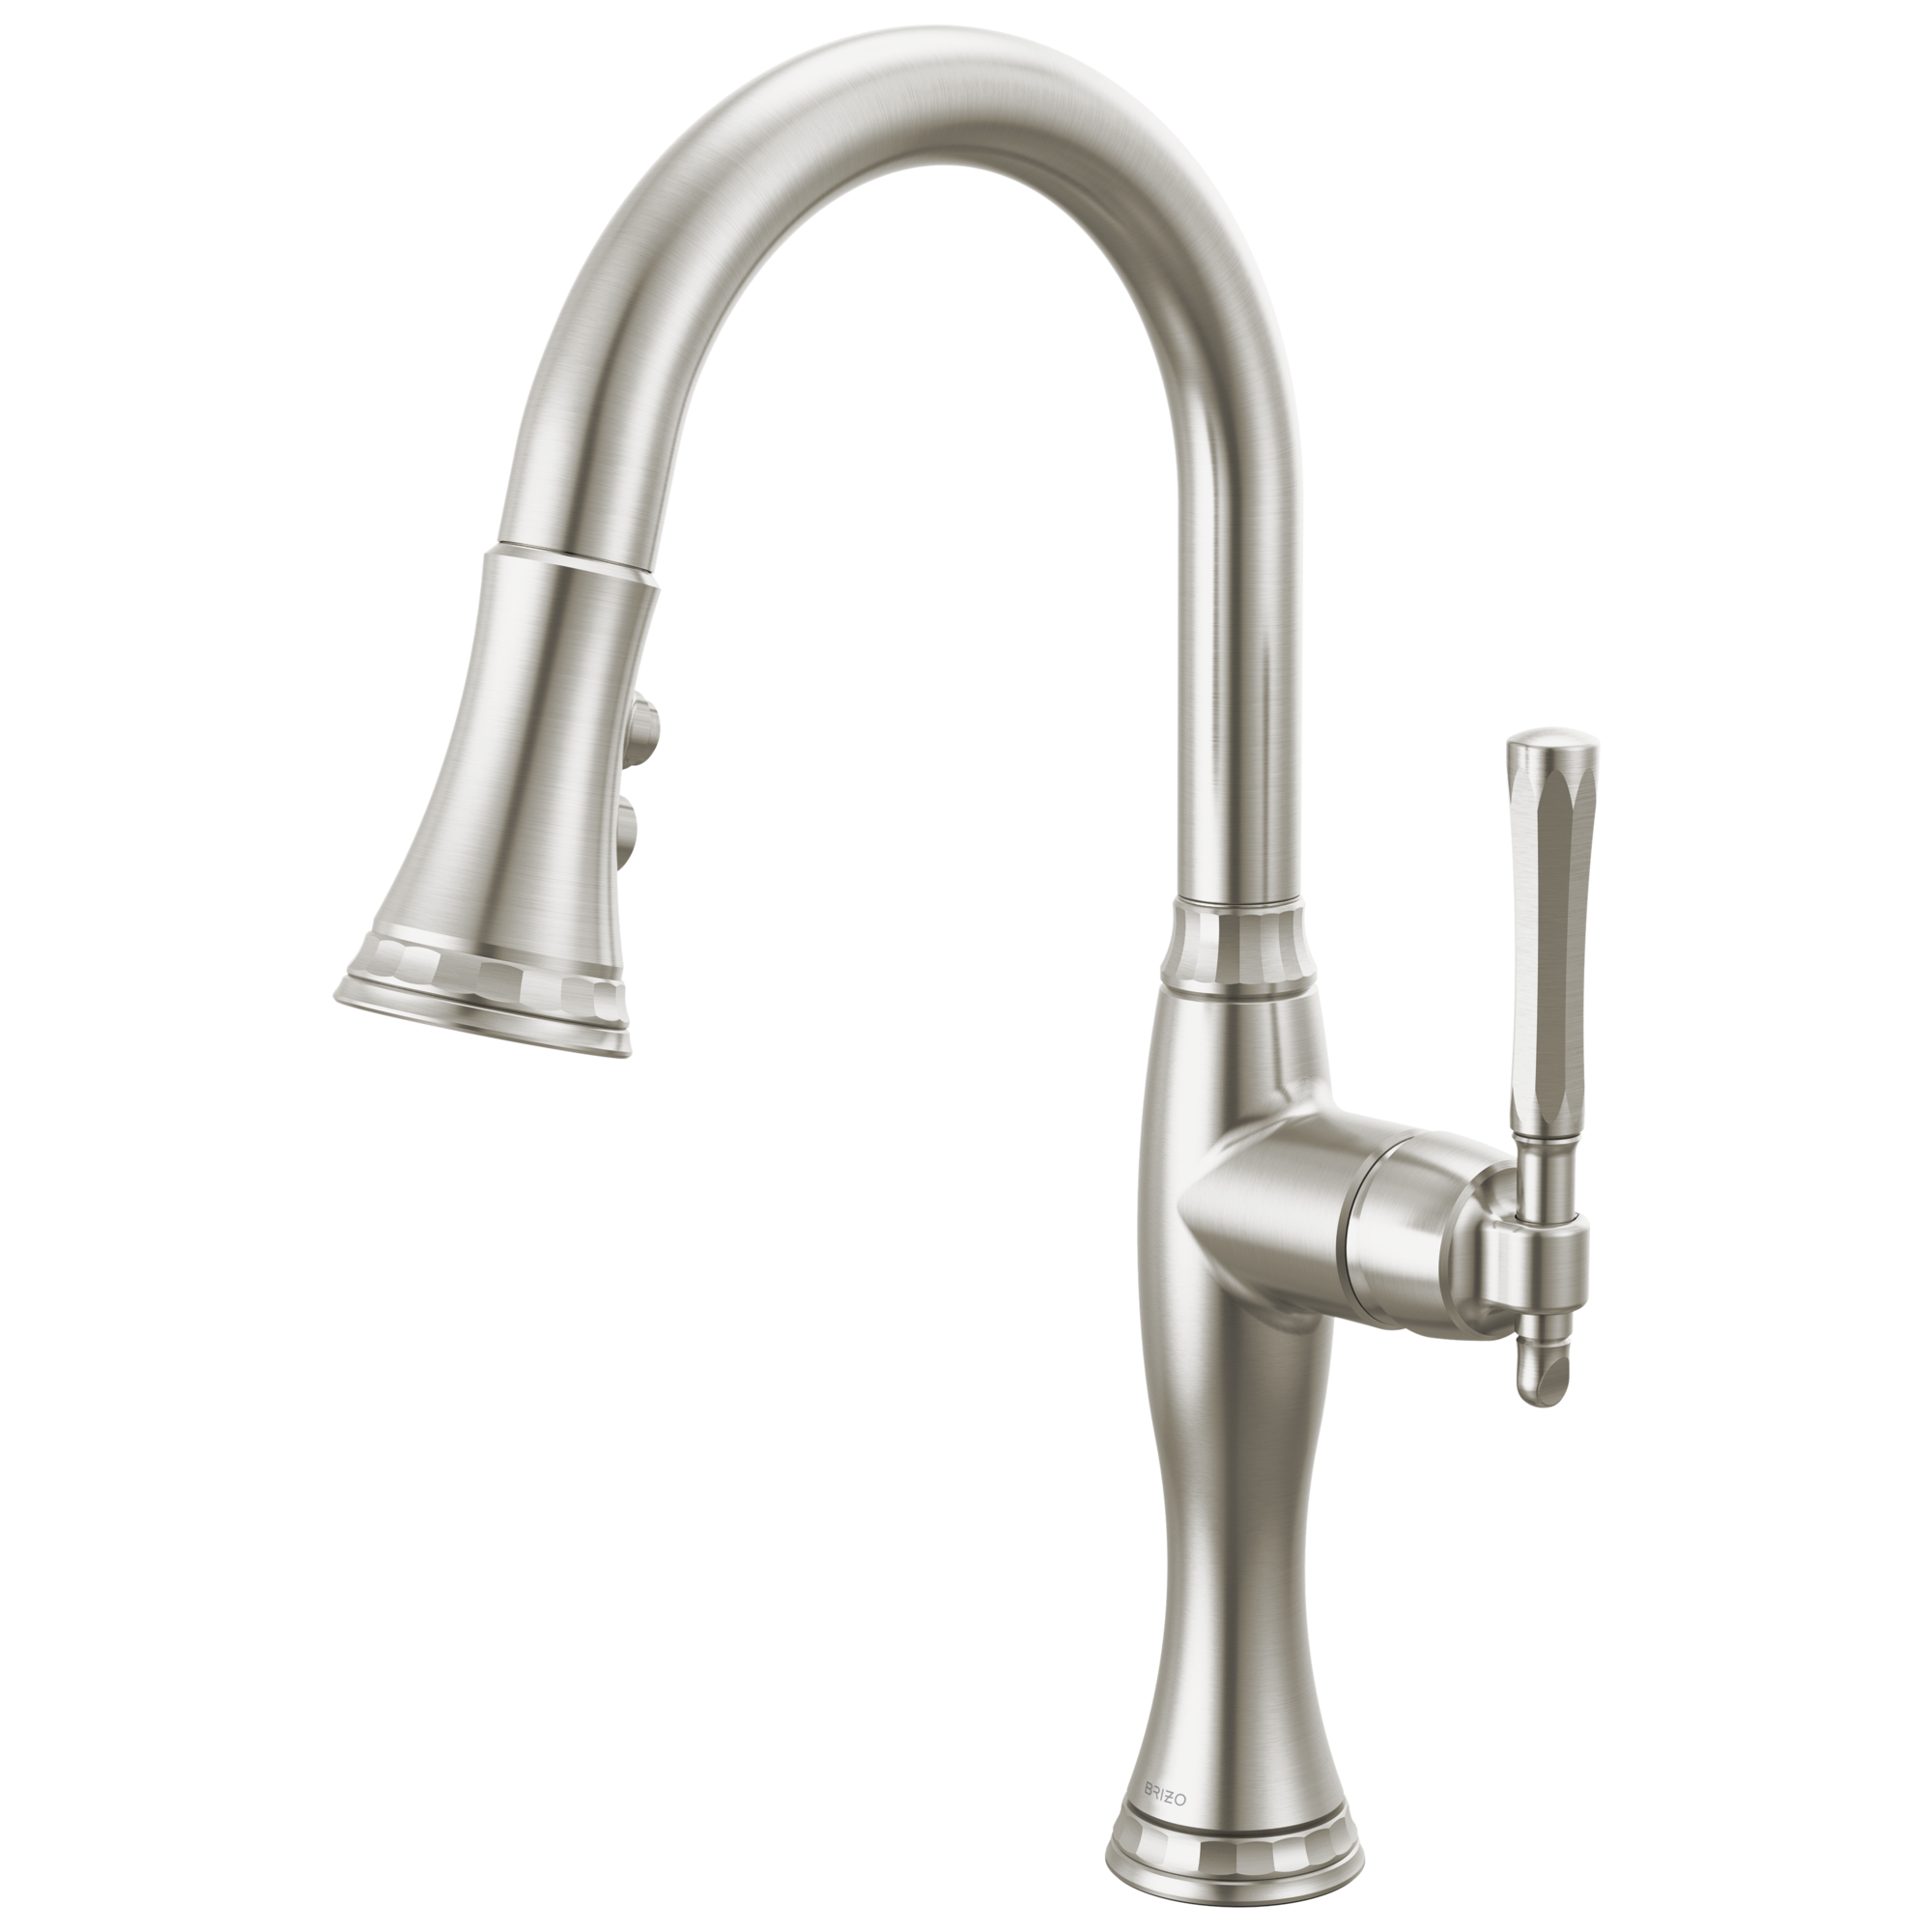 Brizo The Tulham Kitchen Collection by Brizo Pull-Down Prep Kitchen Faucet